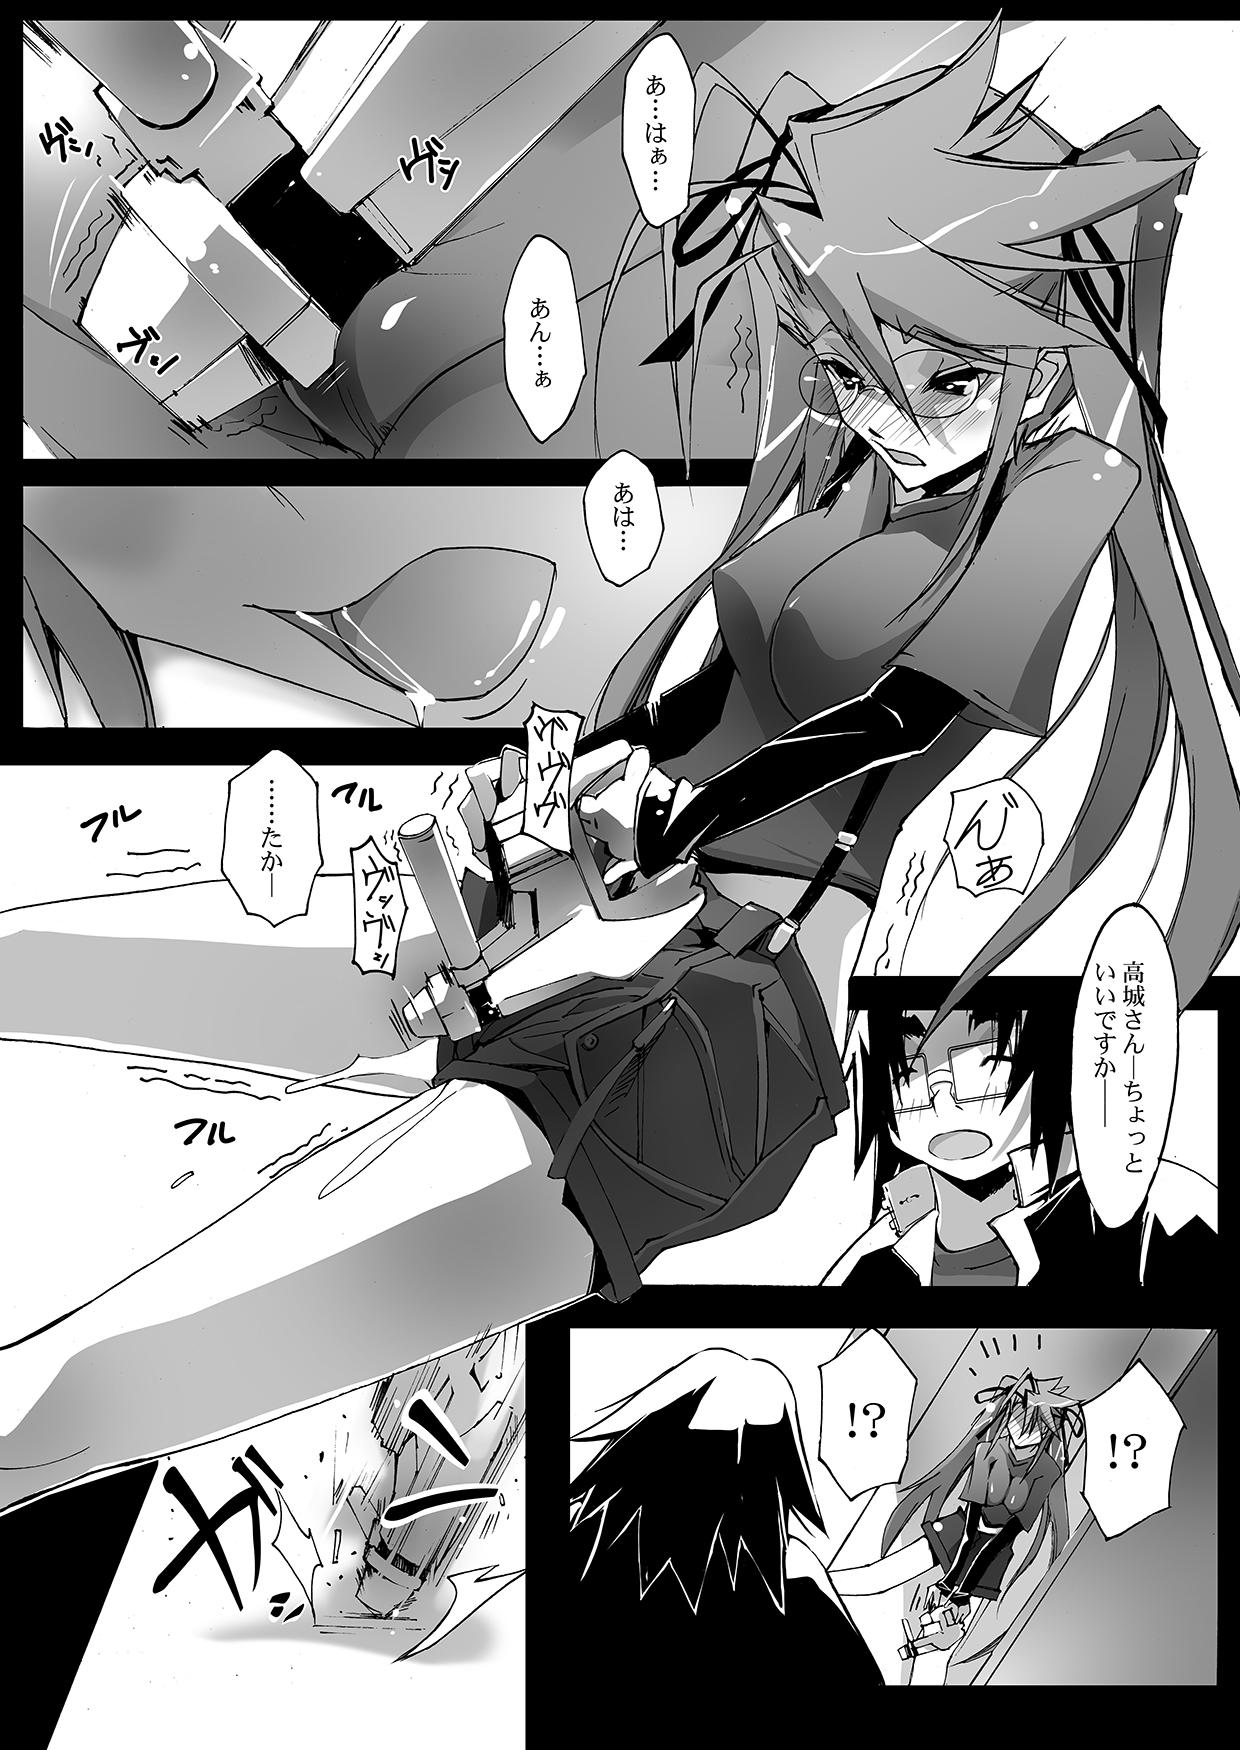 Best Blowjobs Ever Retsujou no Ejiki - Highschool of the dead Doggy - Page 10